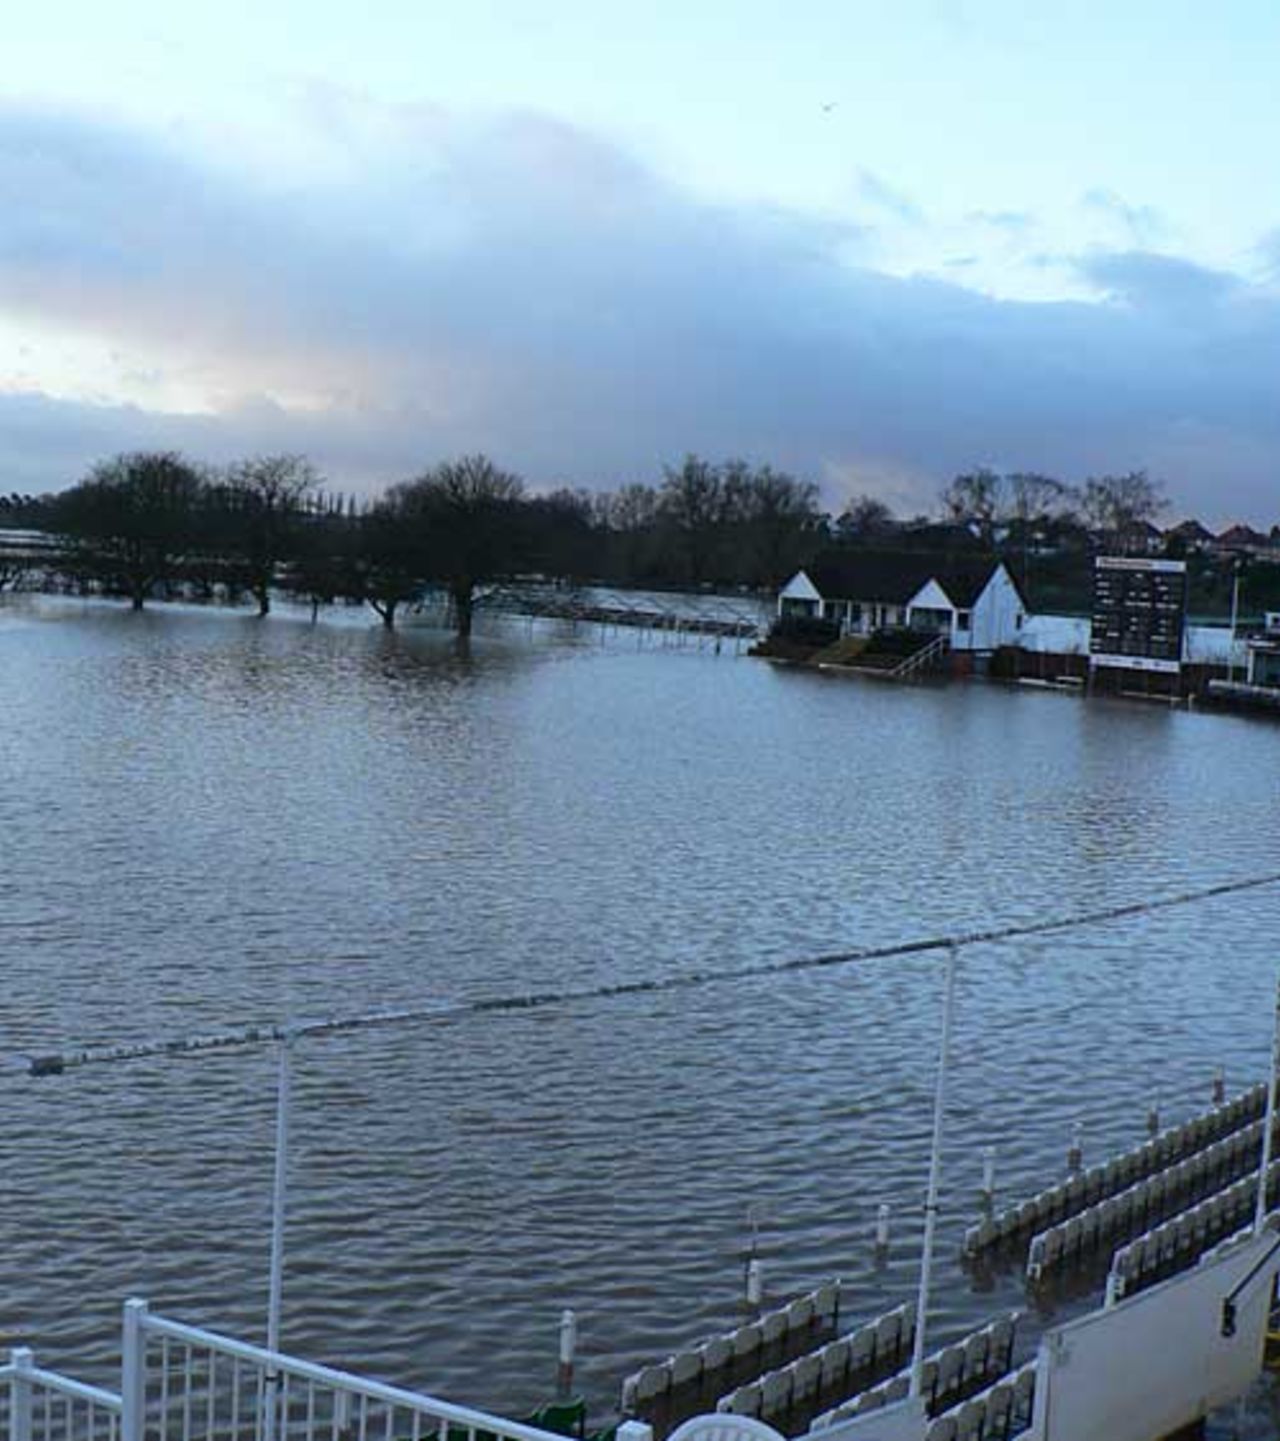 New Road has been hit by further flooding as they try and prepare for the new season, New Road, January 14, 2007